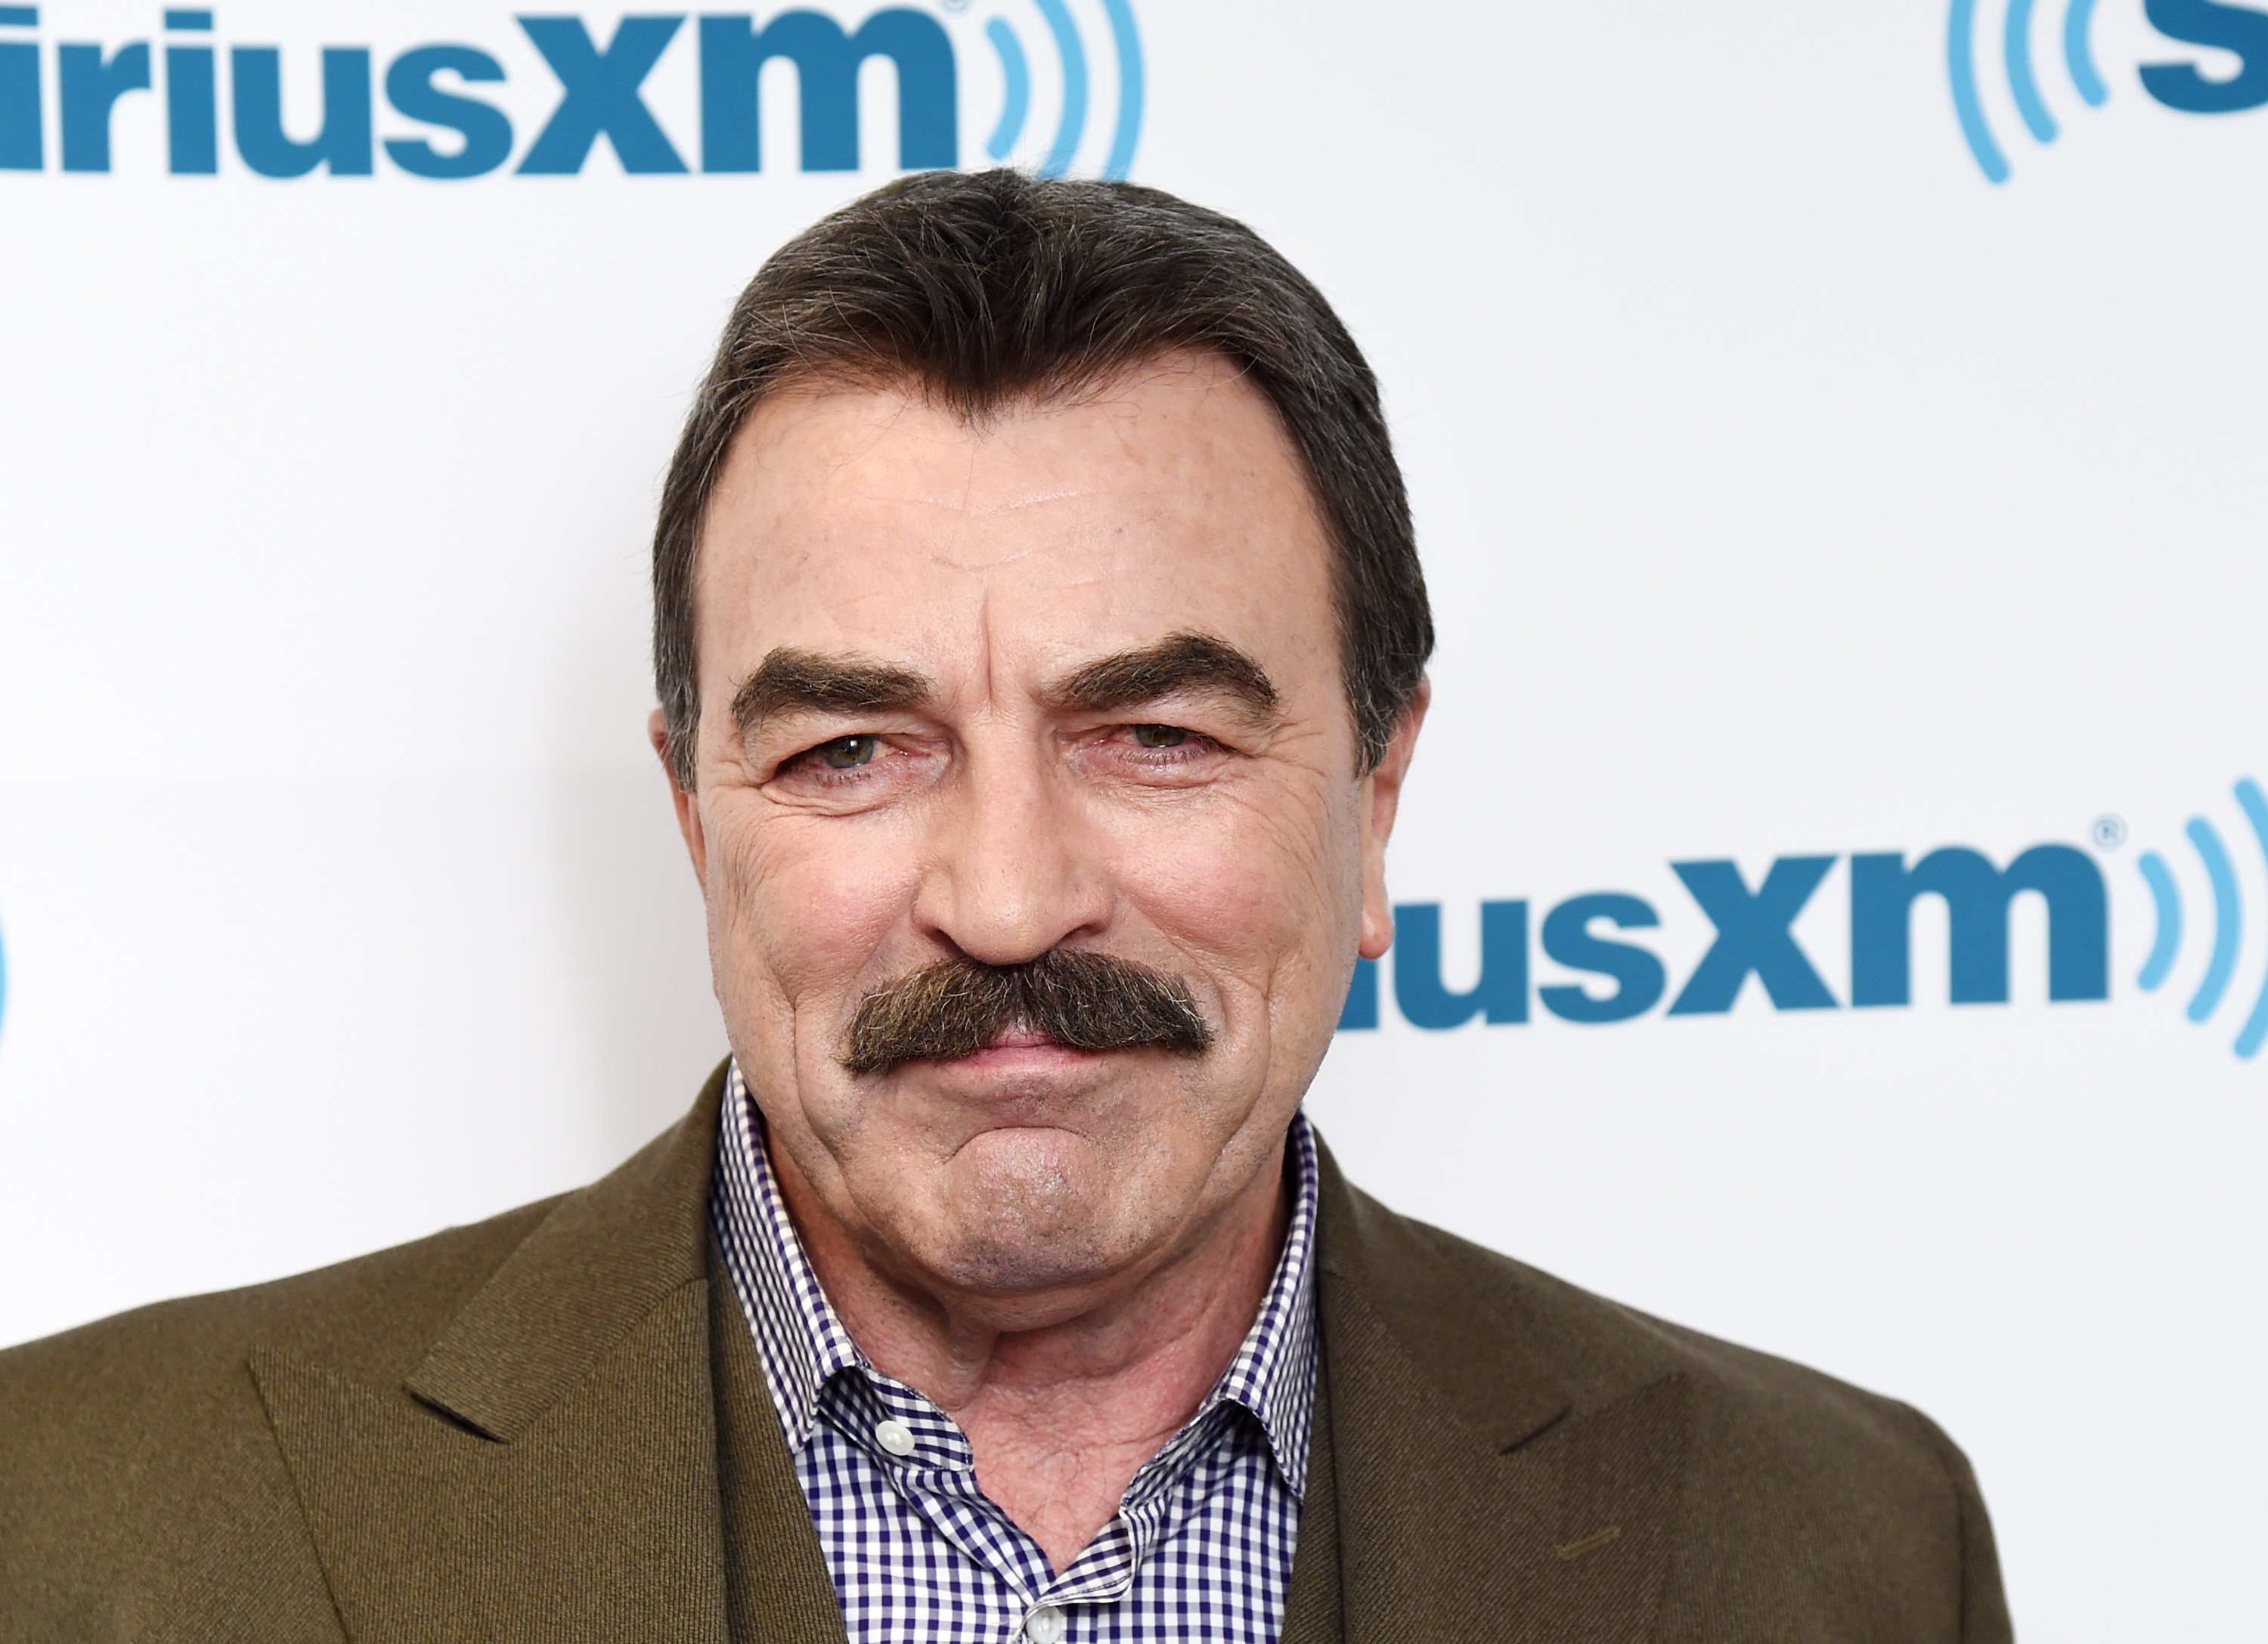 Tom Selleck visits the SiriusXM Studios on October 15, 2015 | Photo: GettyImages